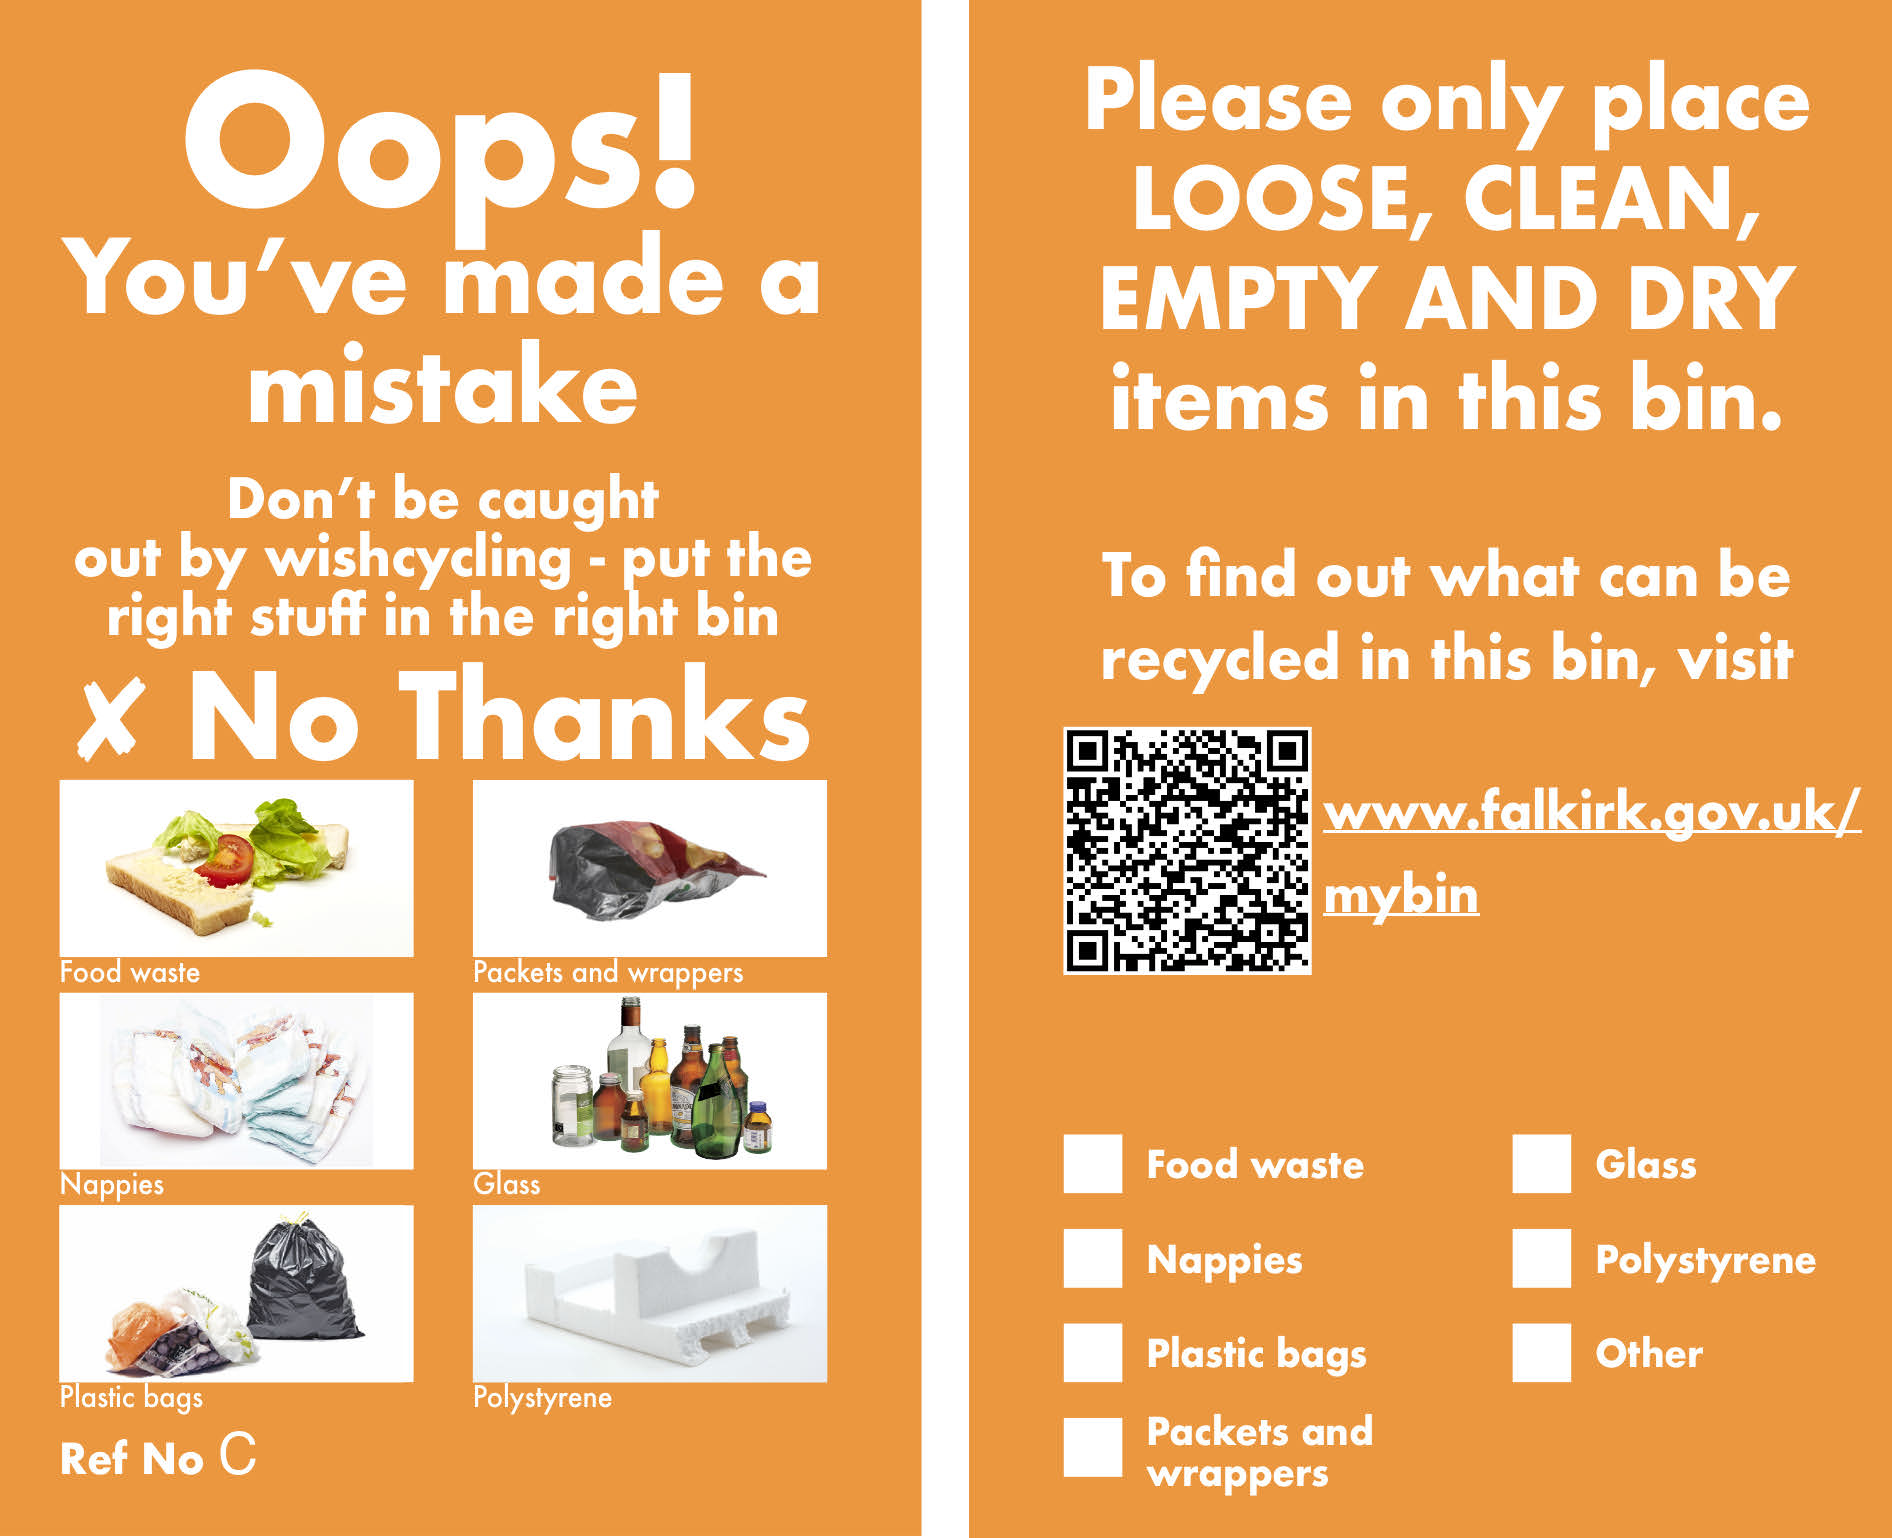 Amber tag - Oops you've made a mistake. We will not be able to collect your bin if it has these items in it on the next collection - food waste, packets and wrappers, nappies, glass, plastic bags, polystyrene